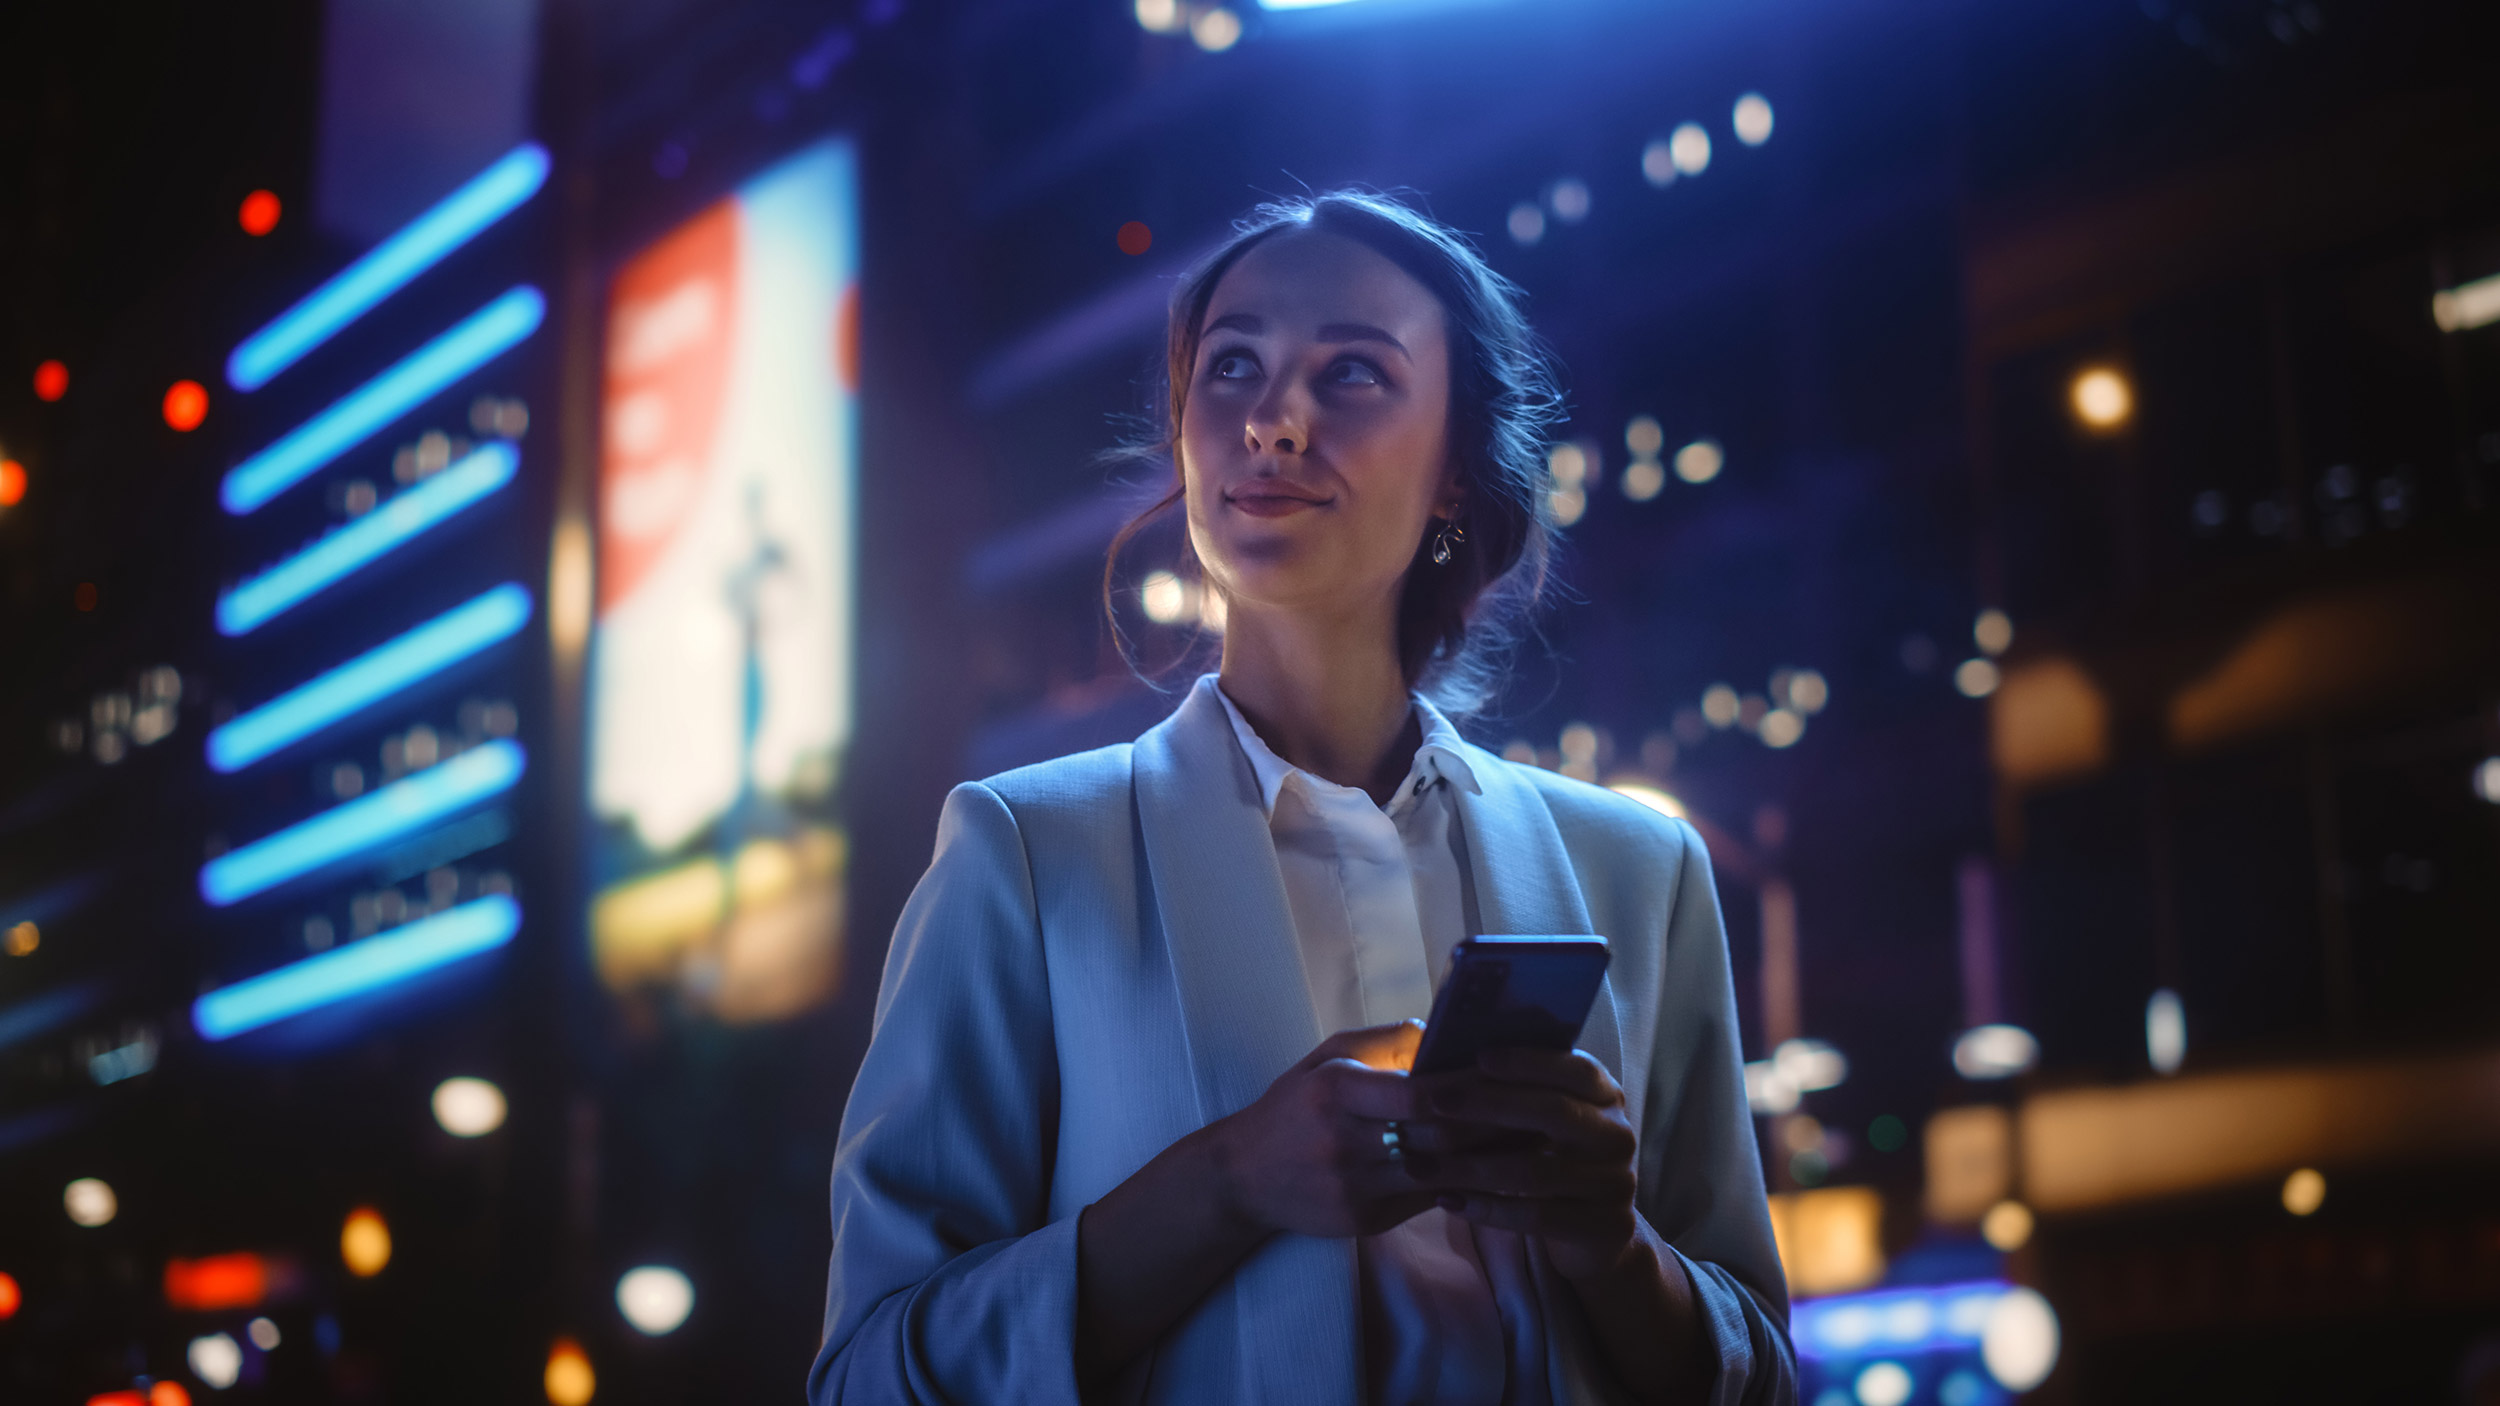 Woman in business attire holding a mobile phone in an urban environment with atmospheric lighting